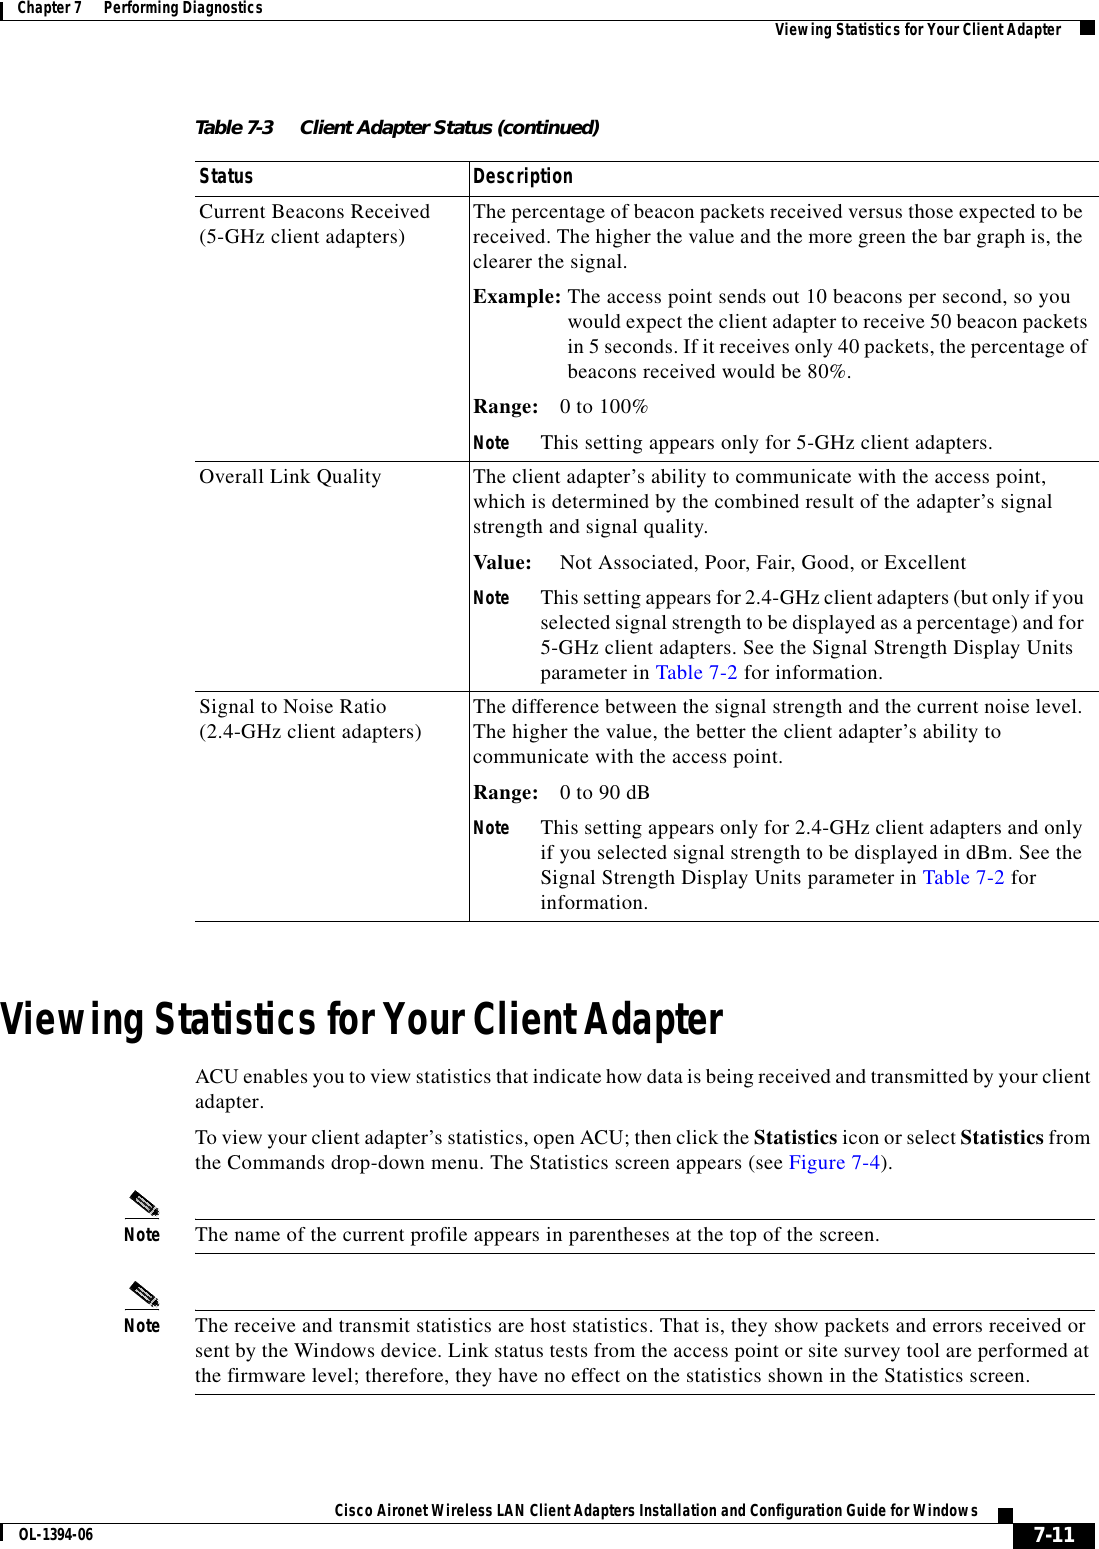 7-11Cisco Aironet Wireless LAN Client Adapters Installation and Configuration Guide for WindowsOL-1394-06Chapter 7      Performing Diagnostics Viewing Statistics for Your Client AdapterViewing Statistics for Your Client AdapterACU enables you to view statistics that indicate how data is being received and transmitted by your client adapter.To view your client adapter’s statistics, open ACU; then click the Statistics icon or select Statistics from the Commands drop-down menu. The Statistics screen appears (see Figure 7-4).Note The name of the current profile appears in parentheses at the top of the screen.Note The receive and transmit statistics are host statistics. That is, they show packets and errors received or sent by the Windows device. Link status tests from the access point or site survey tool are performed at the firmware level; therefore, they have no effect on the statistics shown in the Statistics screen.Current Beacons Received (5-GHz client adapters) The percentage of beacon packets received versus those expected to be received. The higher the value and the more green the bar graph is, the clearer the signal.Example: The access point sends out 10 beacons per second, so youwould expect the client adapter to receive 50 beacon packetsin 5 seconds. If it receives only 40 packets, the percentage ofbeacons received would be 80%.Range: 0 to 100%Note This setting appears only for 5-GHz client adapters.Overall Link Quality The client adapter’s ability to communicate with the access point, which is determined by the combined result of the adapter’s signal strength and signal quality.Value: Not Associated, Poor, Fair, Good, or ExcellentNote This setting appears for 2.4-GHz client adapters (but only if you selected signal strength to be displayed as a percentage) and for 5-GHz client adapters. See the Signal Strength Display Units parameter in Table 7-2 for information.Signal to Noise Ratio (2.4-GHz client adapters) The difference between the signal strength and the current noise level. The higher the value, the better the client adapter’s ability to communicate with the access point.Range: 0 to 90 dBNote This setting appears only for 2.4-GHz client adapters and only if you selected signal strength to be displayed in dBm. See the Signal Strength Display Units parameter in Table 7-2 for information.Table 7-3 Client Adapter Status (continued)Status Description